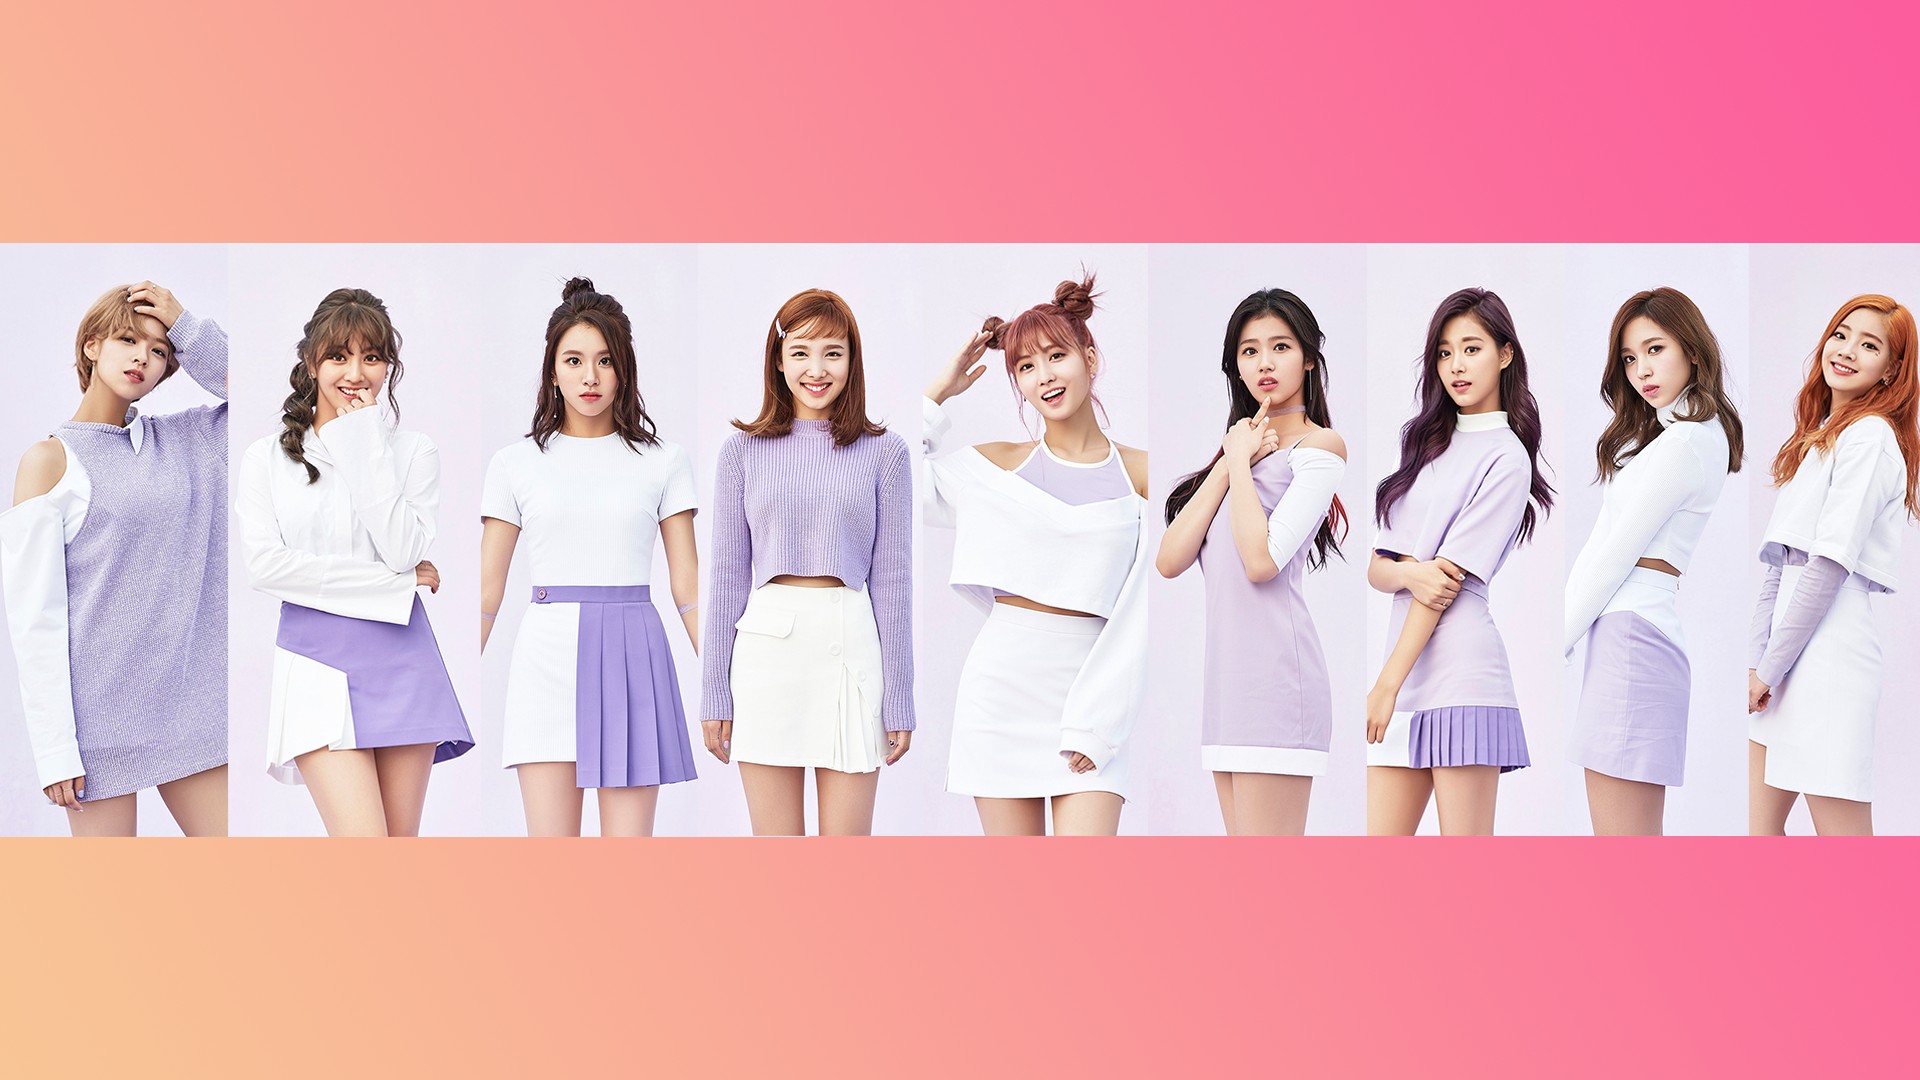 Twice Wallpaper And Background Image